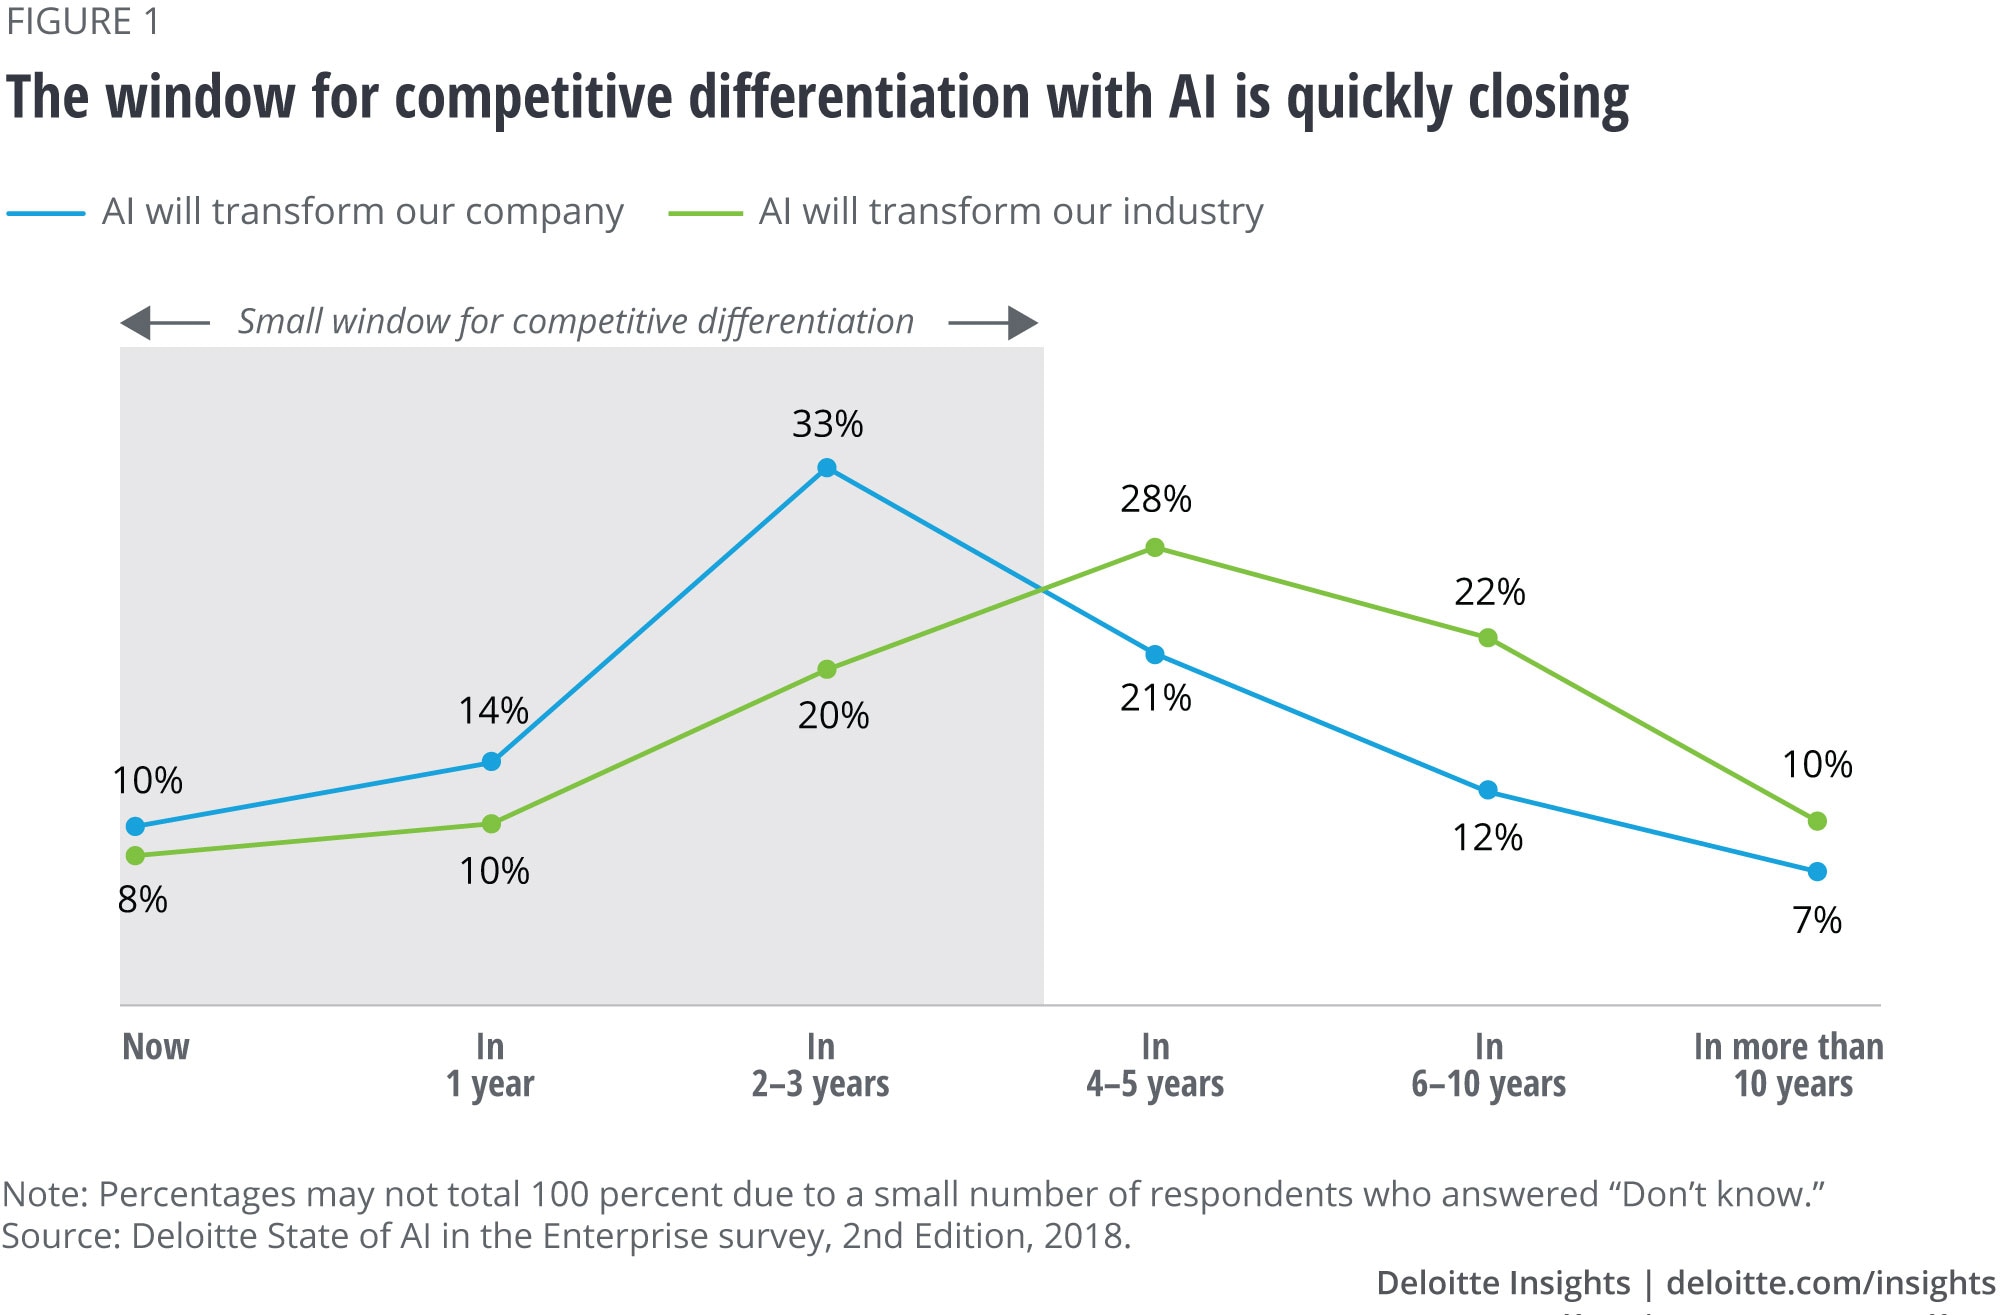 The window for competitive differentiation with AI is quickly closing